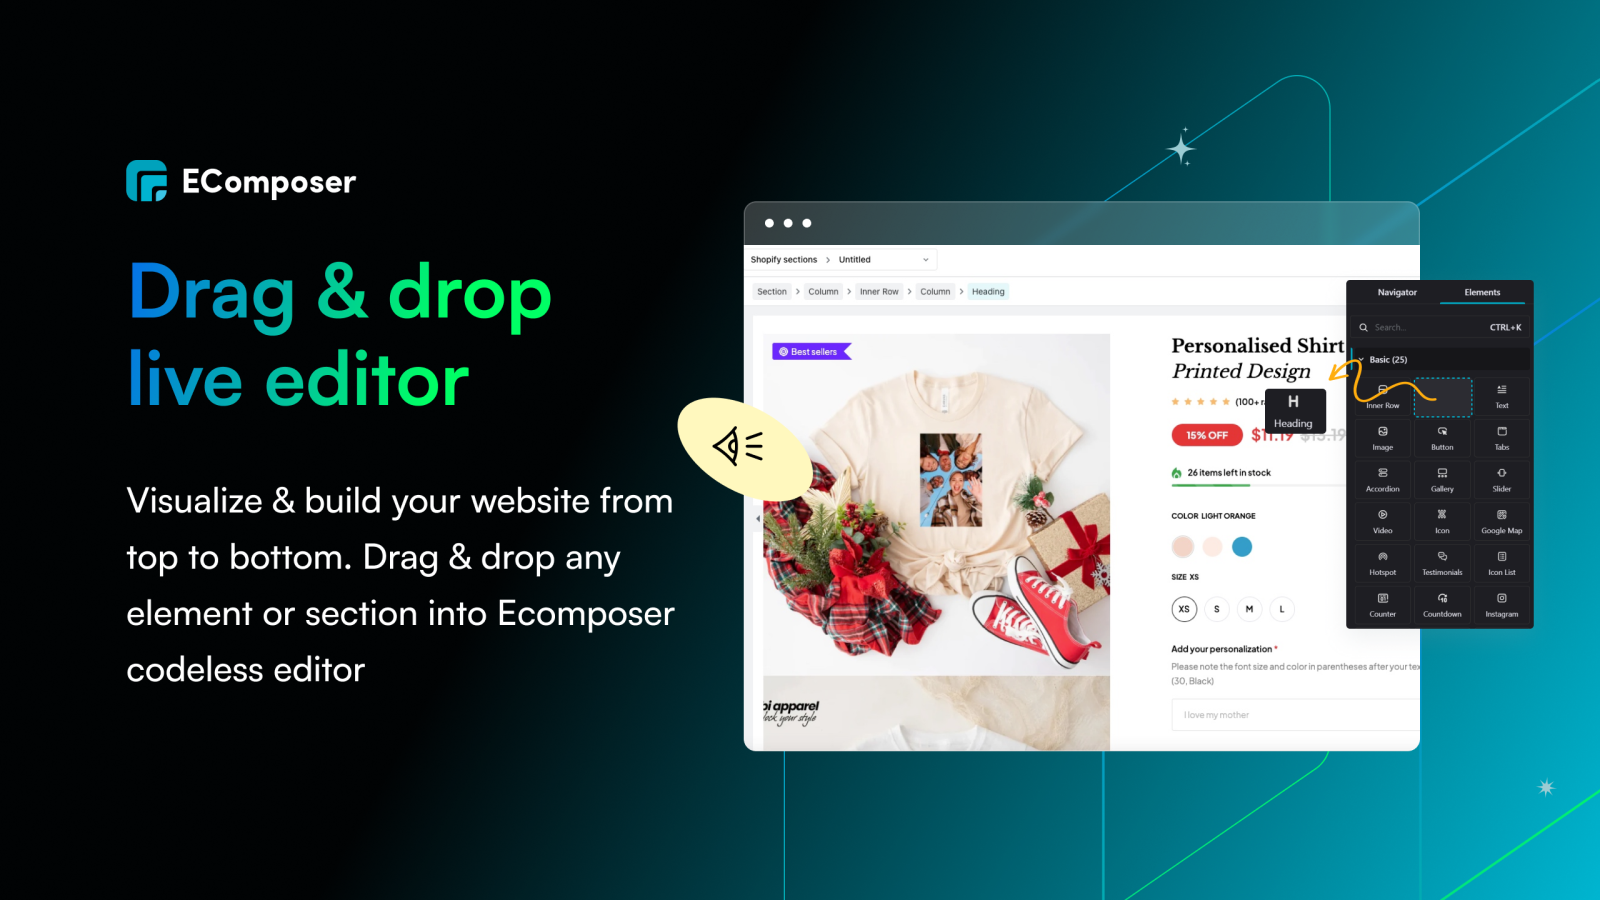 Live drag & drop editor, no code required